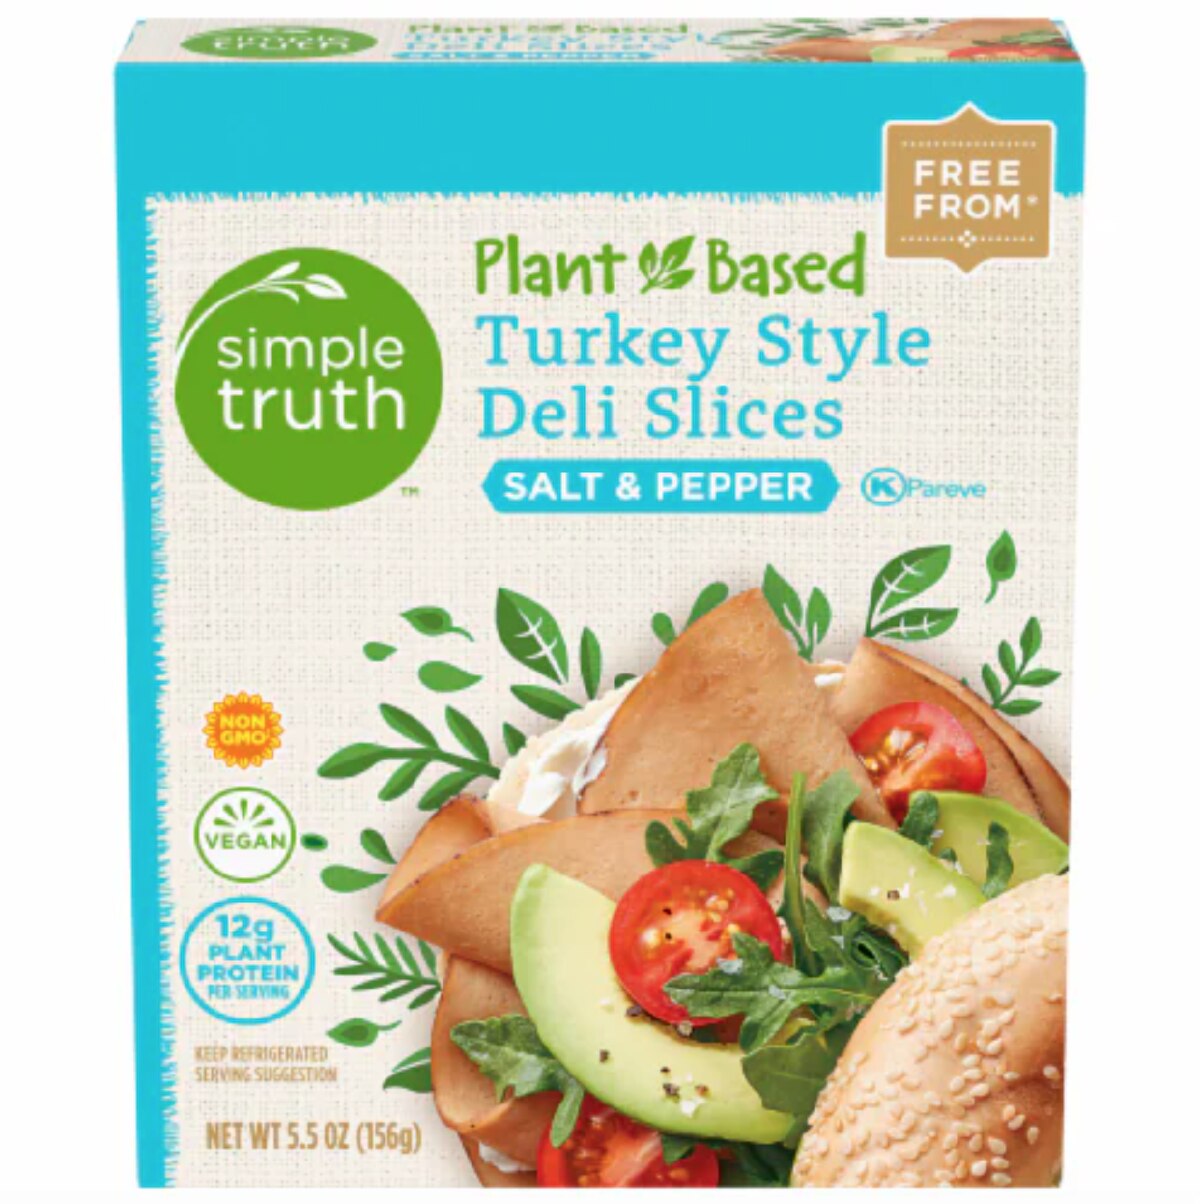 A turquoise and green package of Simple Truth Plant-Based Turkey Style Deli Slices in Salt & Pepper Flavor on a white background.